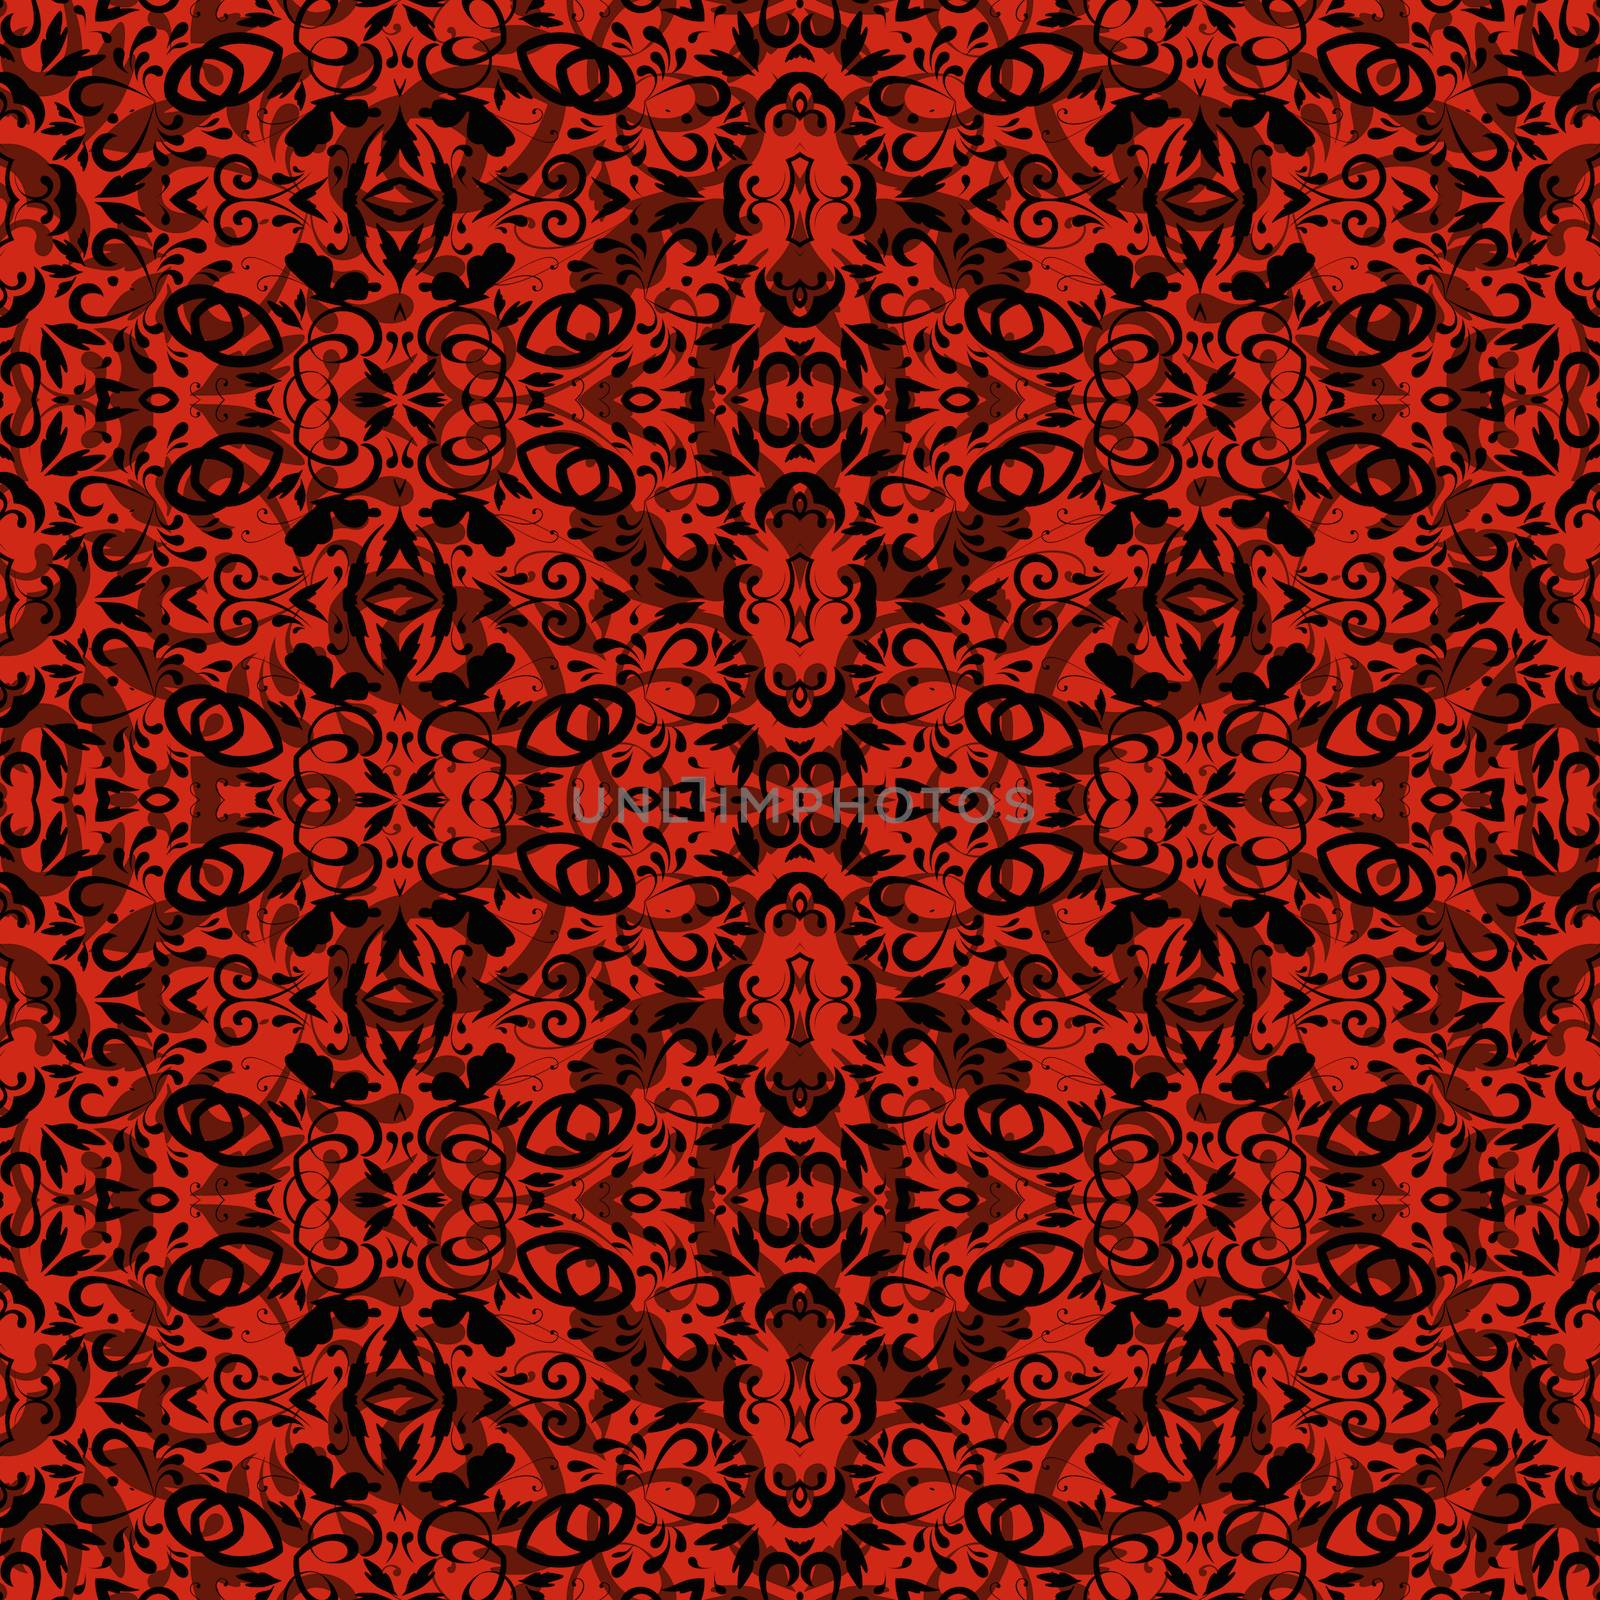 Seamless abstract pattern, black contours on red background.